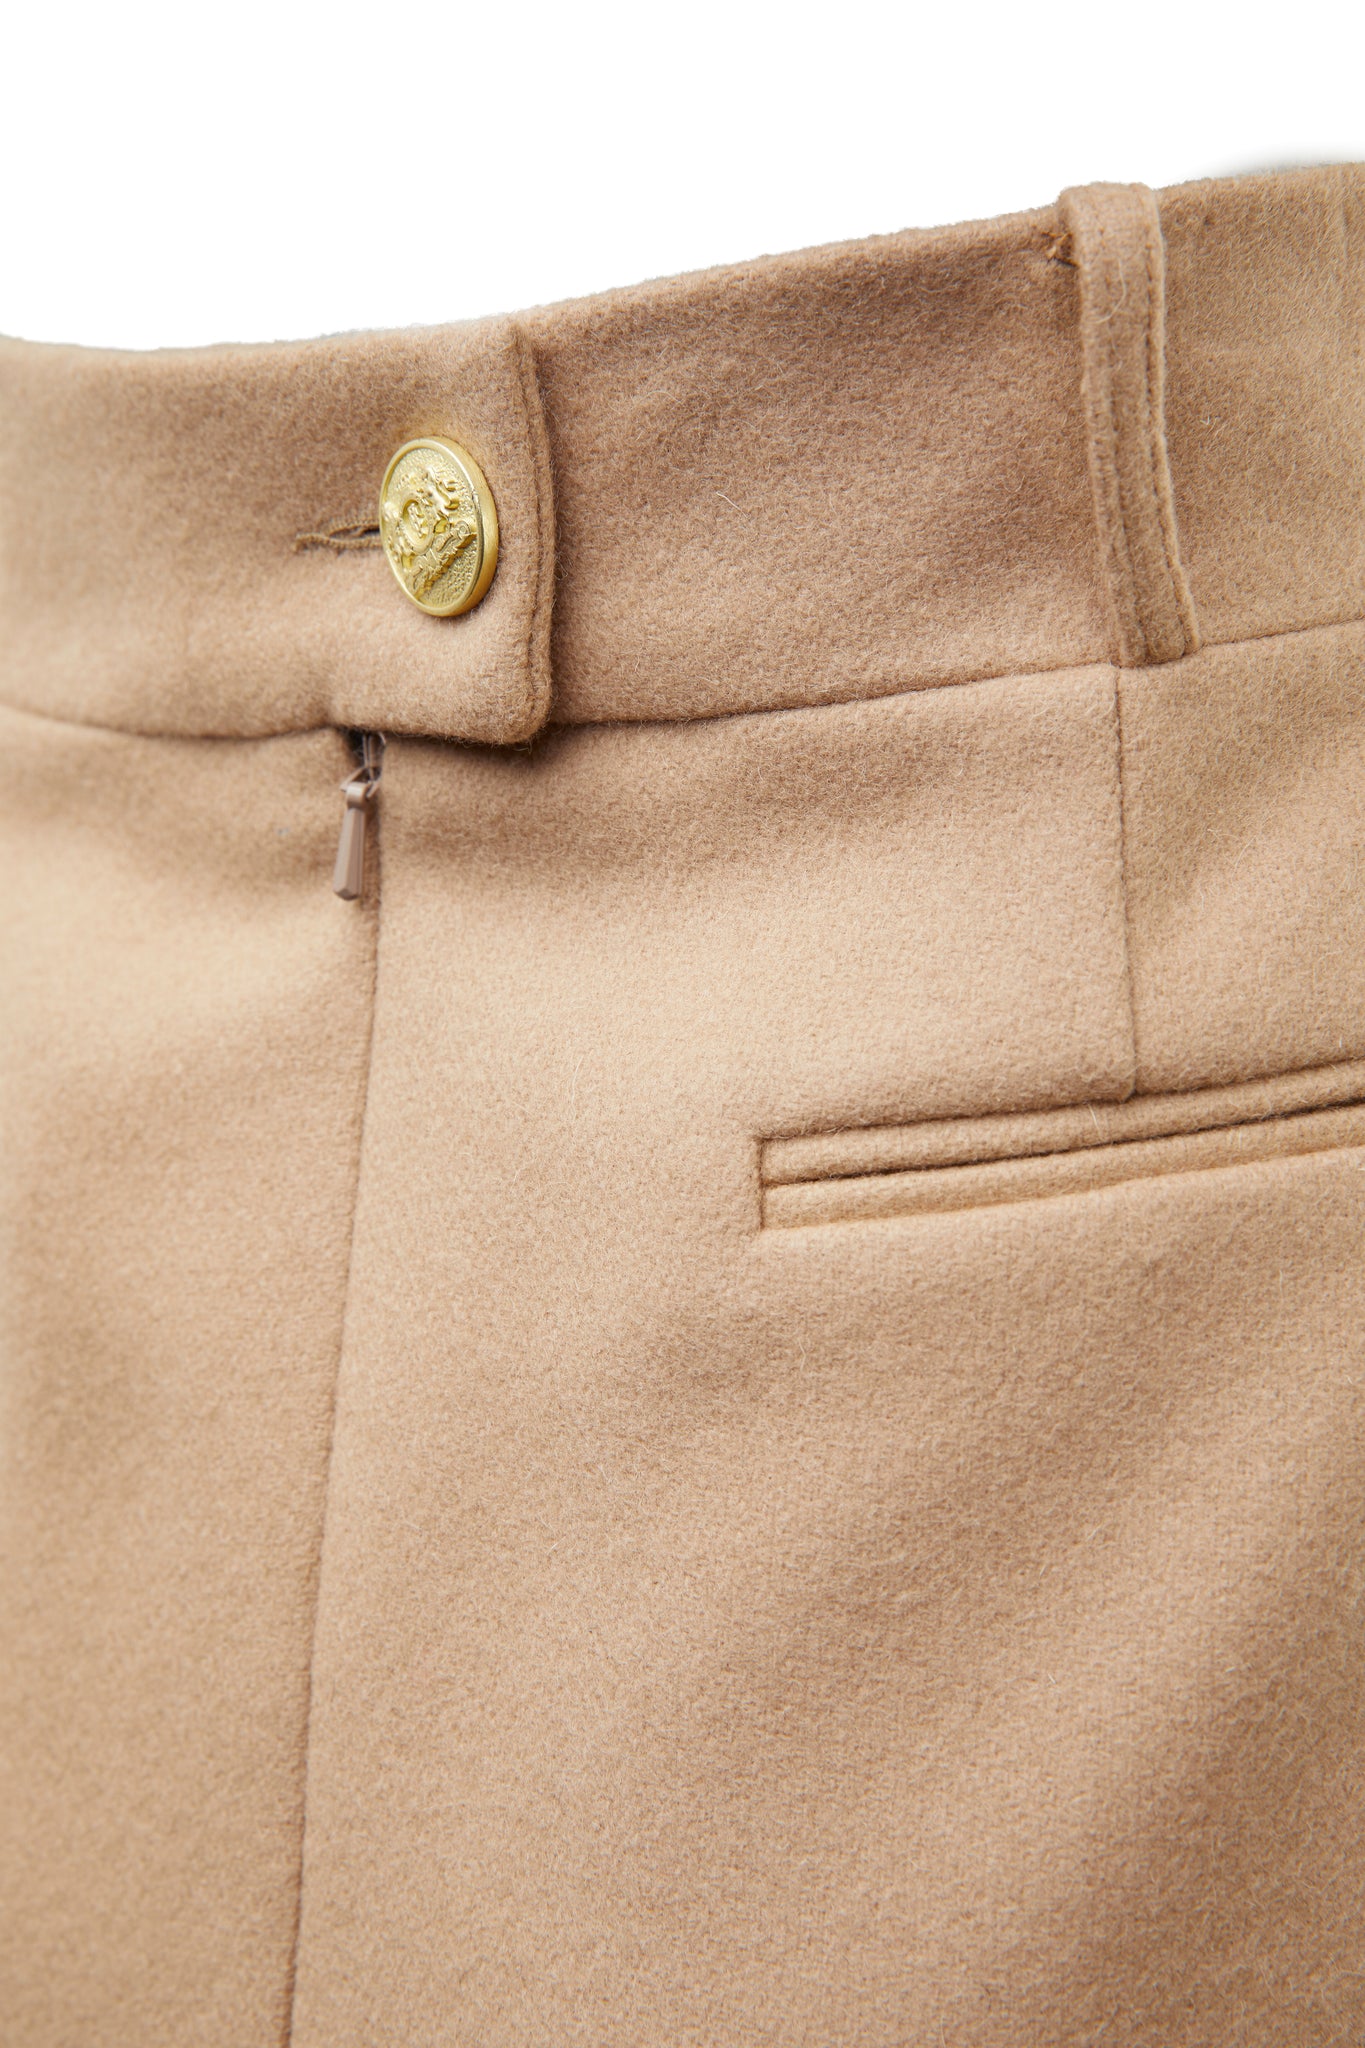 gold button detail on back waistband of womens camel wool pencil mini skirt with concealed zip fastening on centre back and gold rivets down front